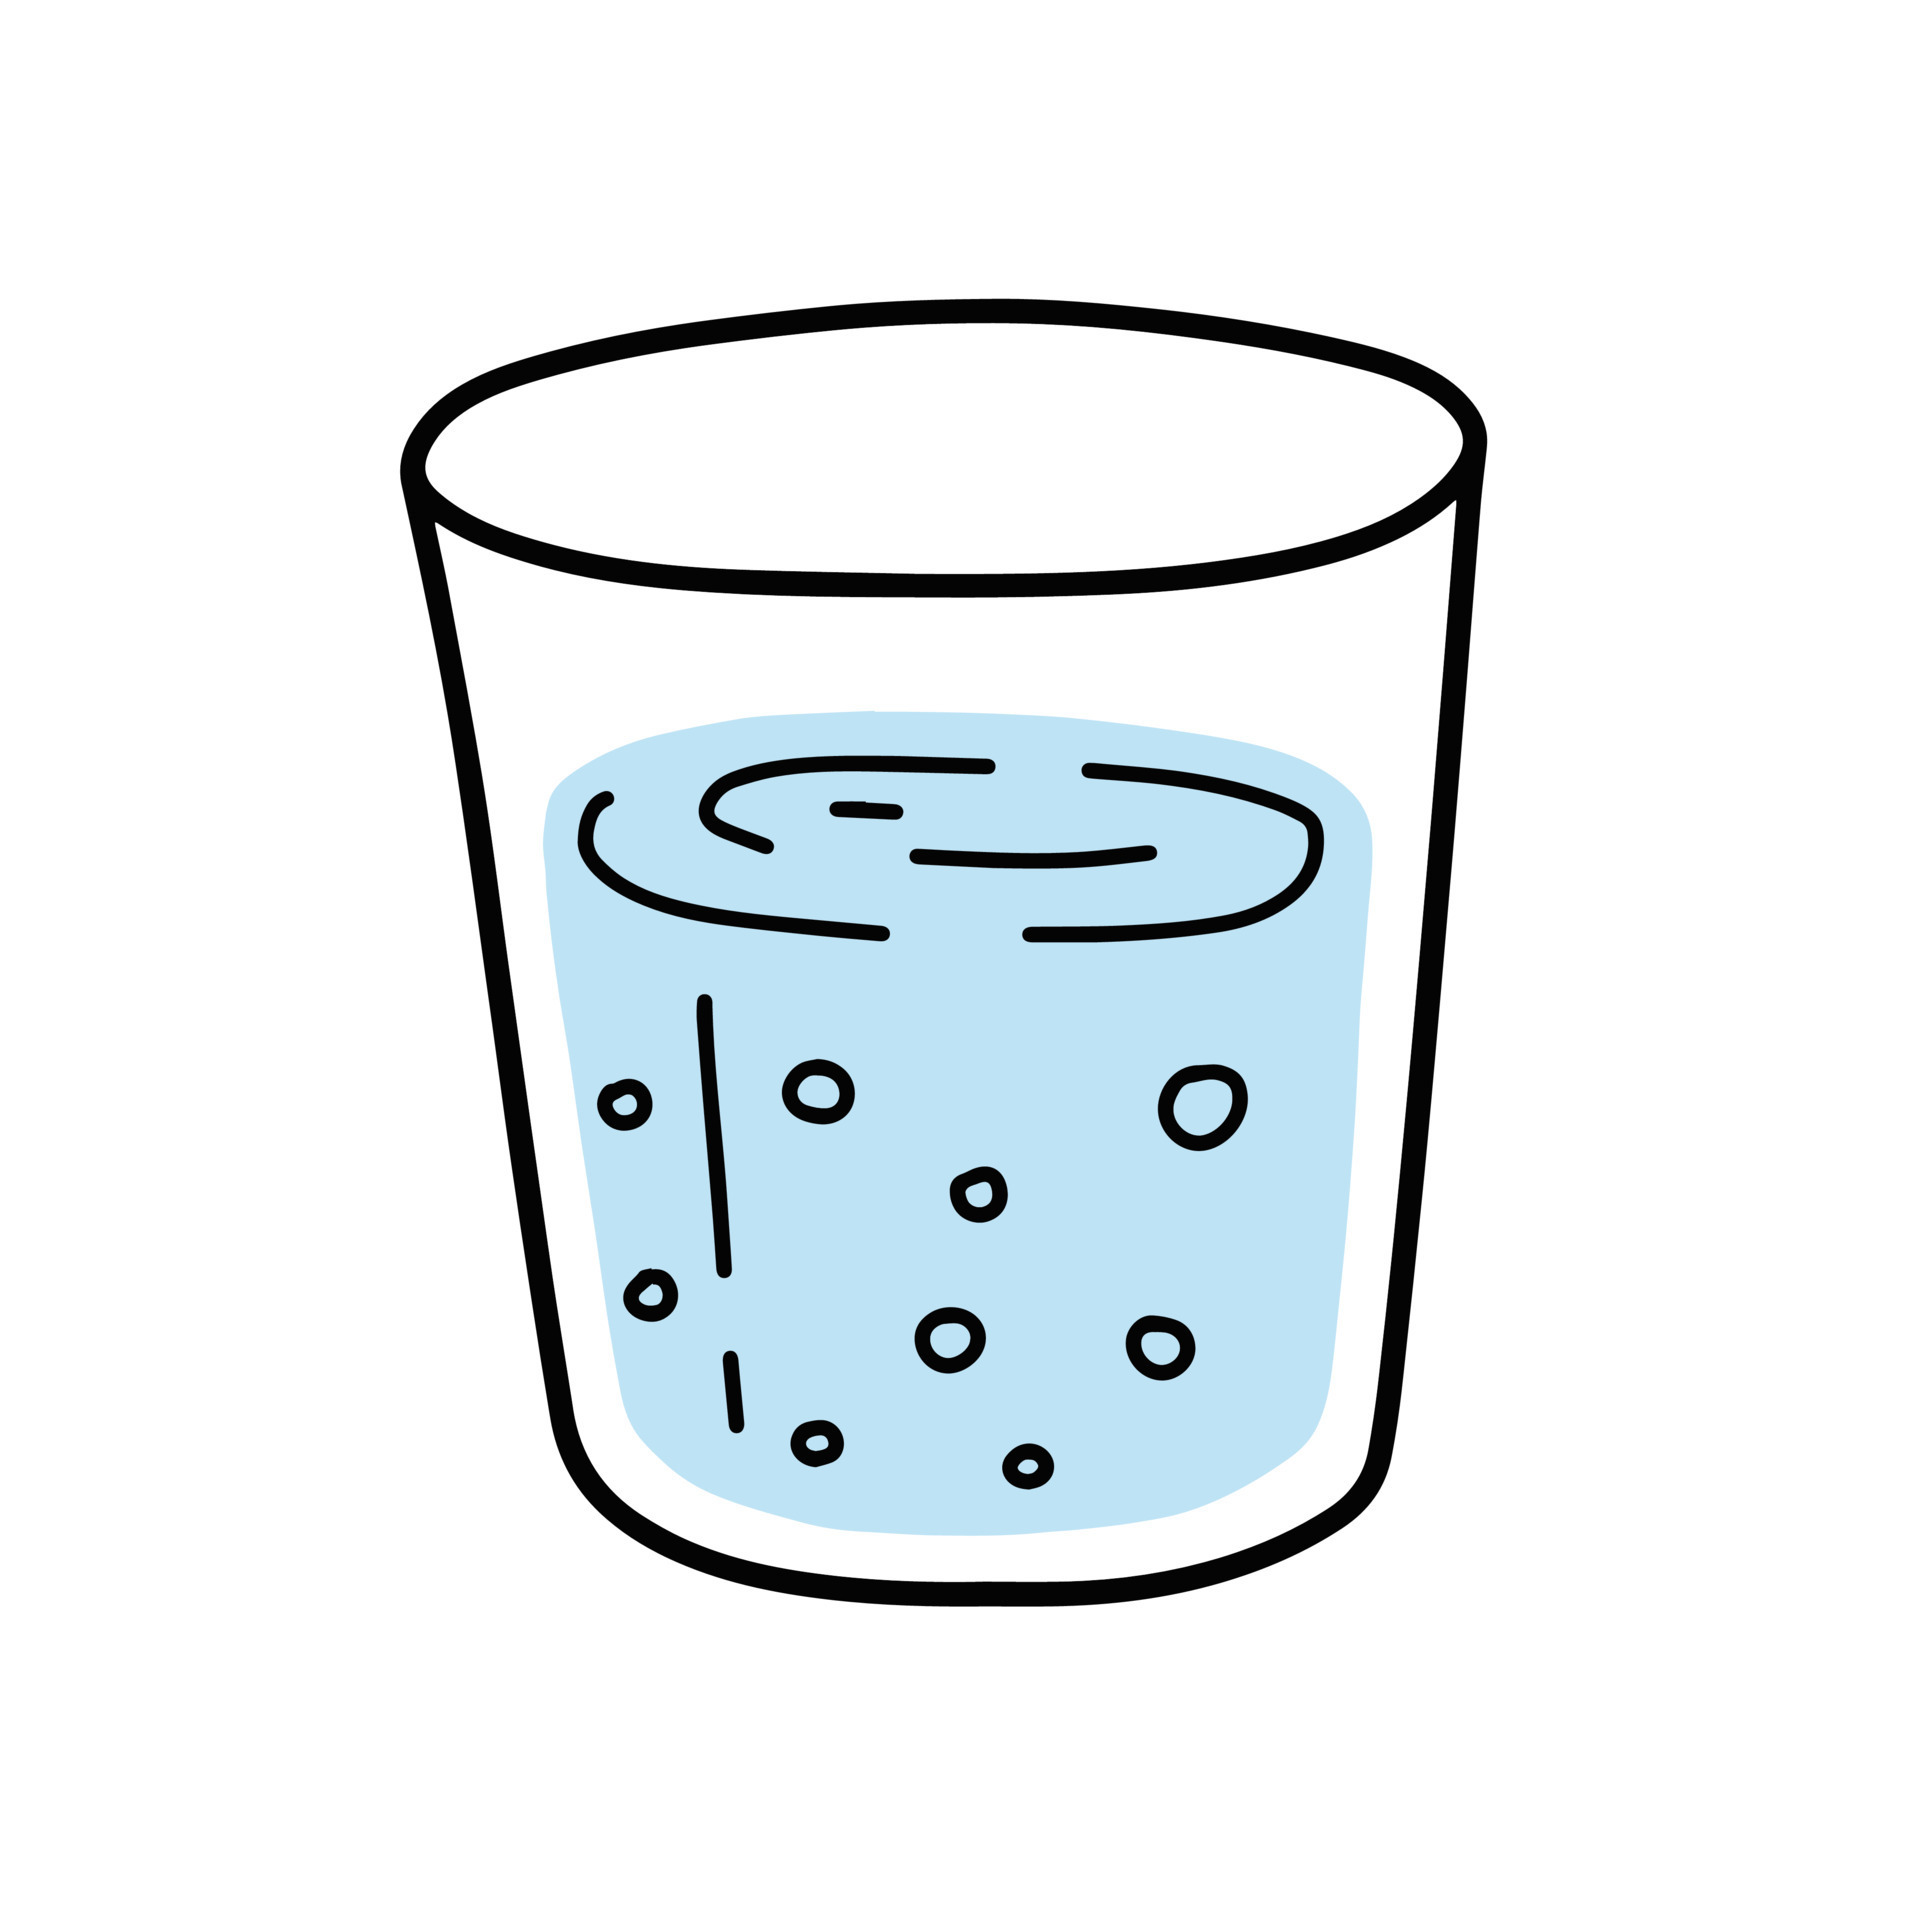 https://static.vecteezy.com/system/resources/previews/017/428/798/original/glass-of-water-blue-liquid-cup-refreshing-drink-doodle-outline-cartoon-trendy-modern-illustration-vector.jpg